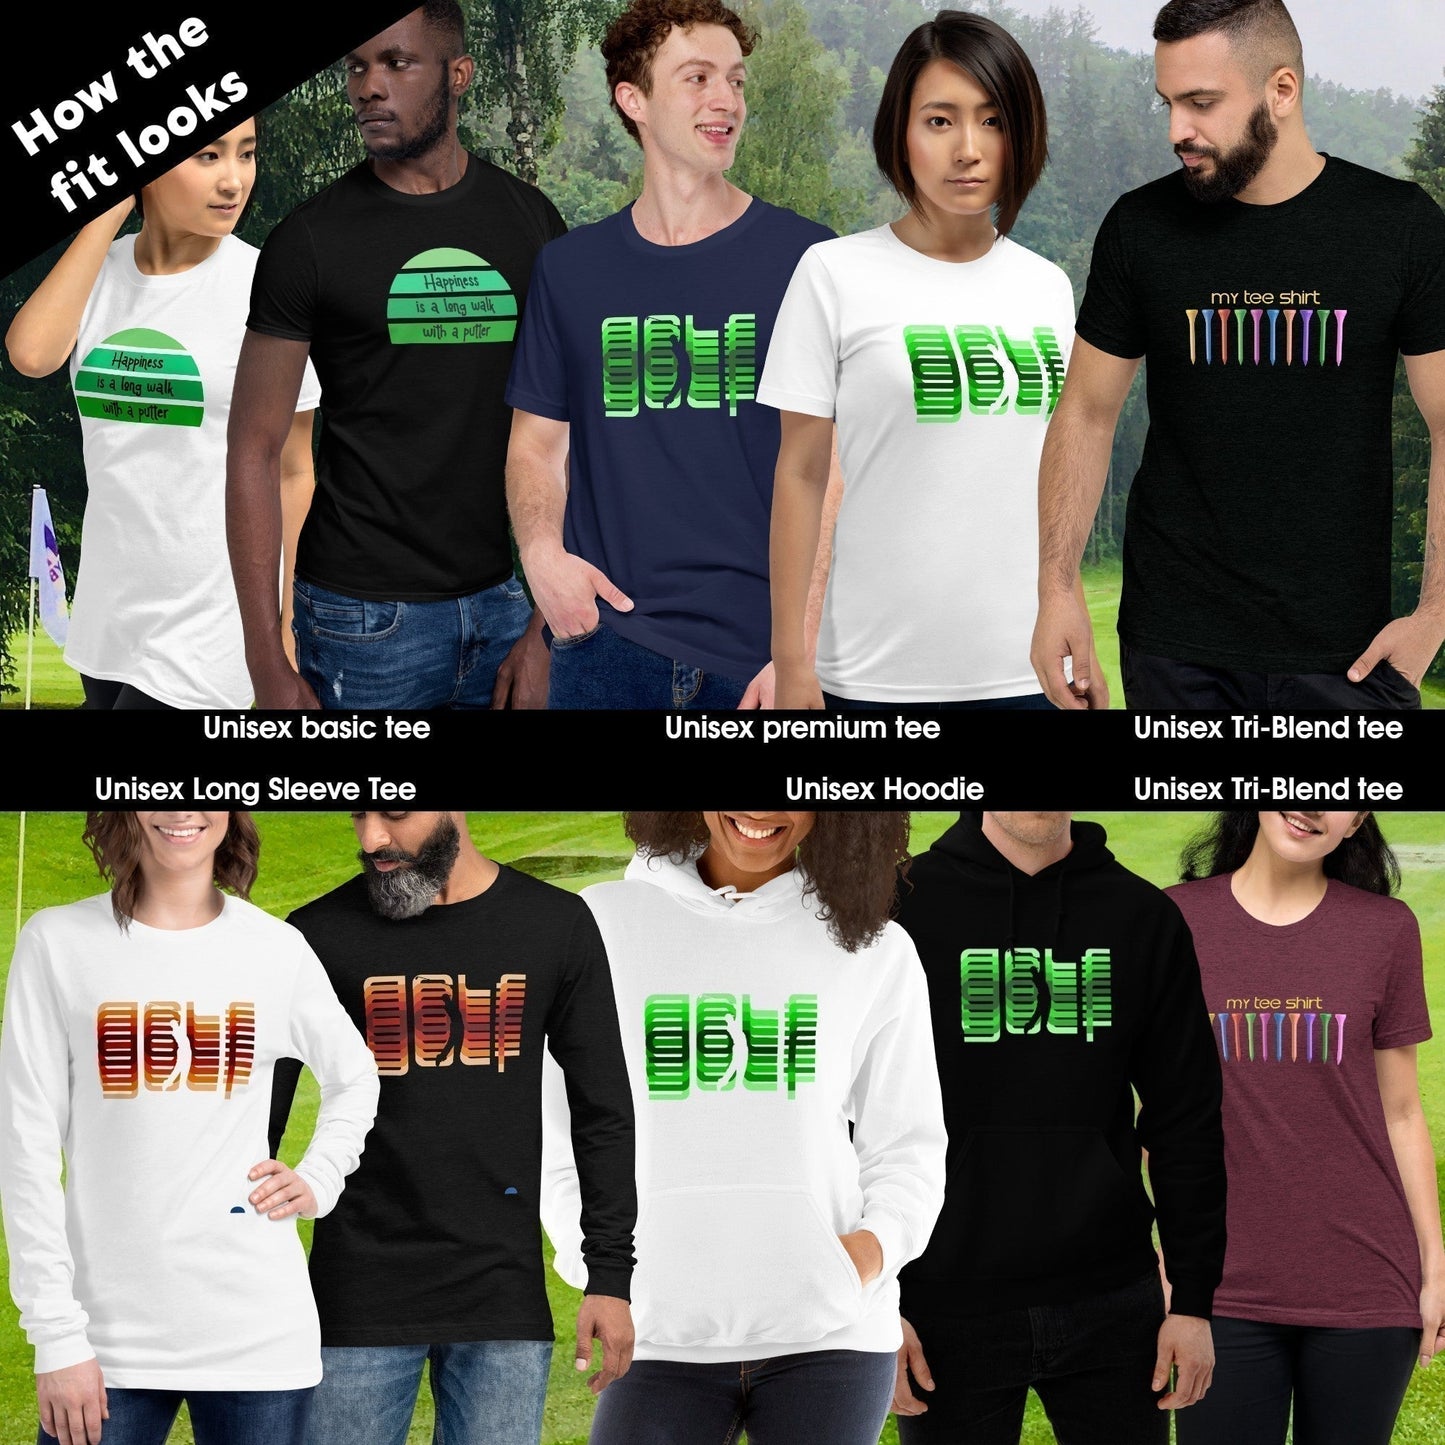 Parfection Golf TShirt and Hoodie is a Creative Golf Graphic design for Men and Women